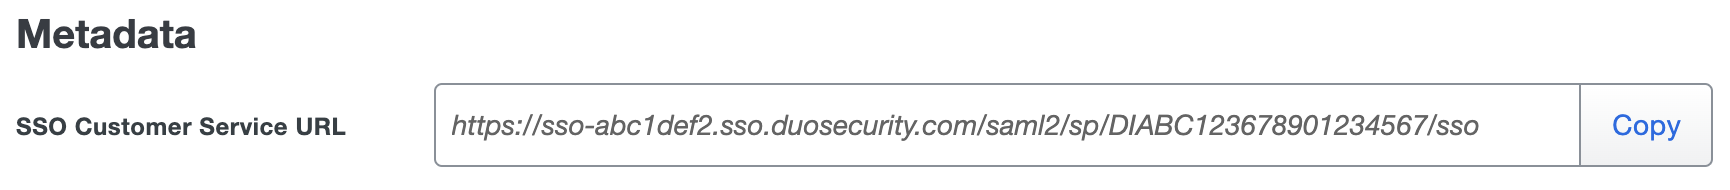 Duo Cisco Email Security SSO Customer Service URL